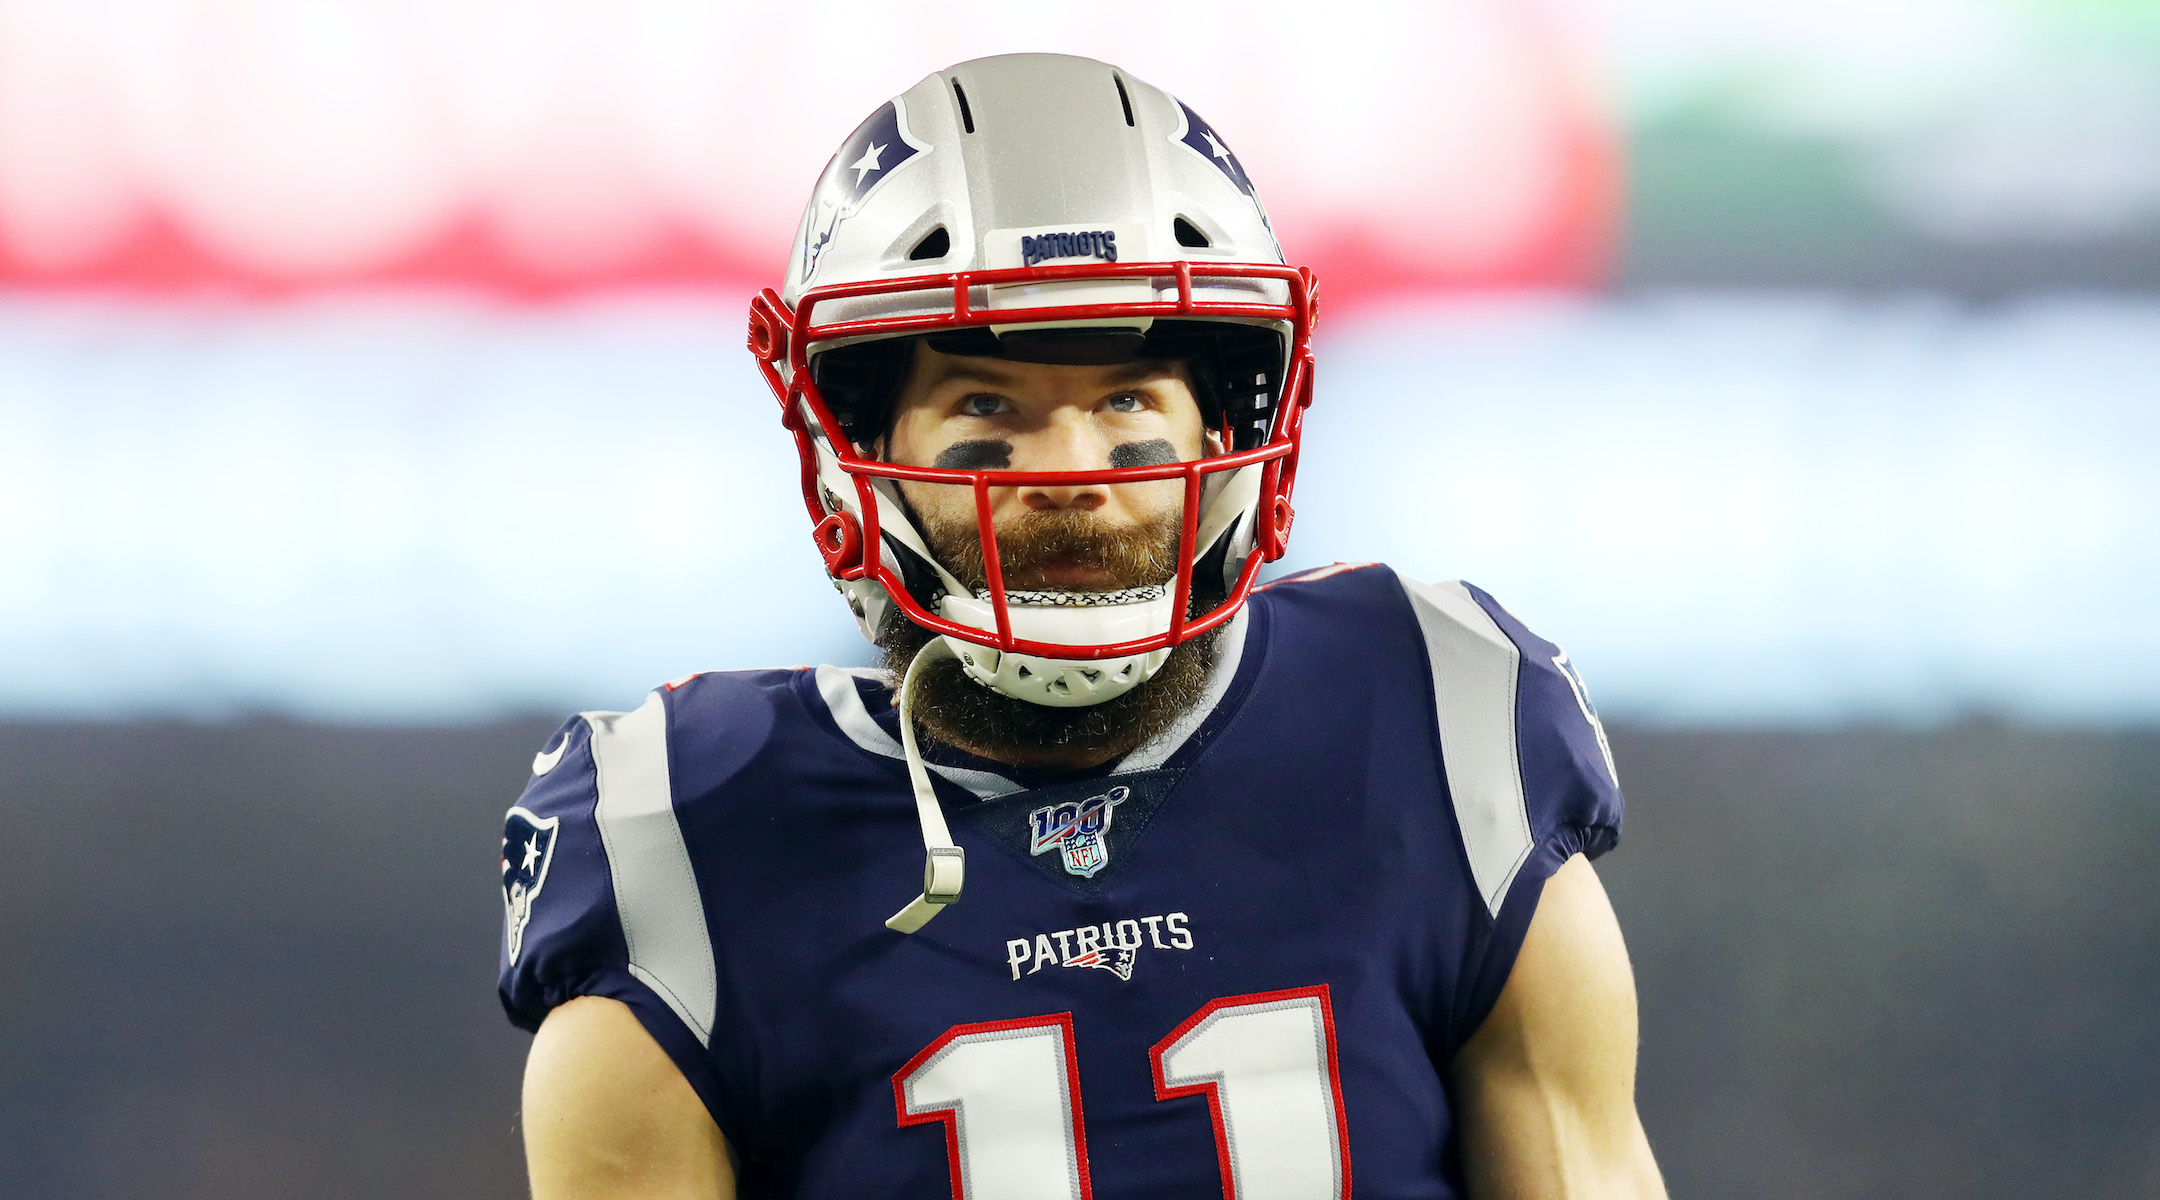 Julian Edelman warms up on the field before a game against the Tennessee Titans, Jan. 4, 2020. (Photo/JTA-Maddie Meyer-Getty Images)